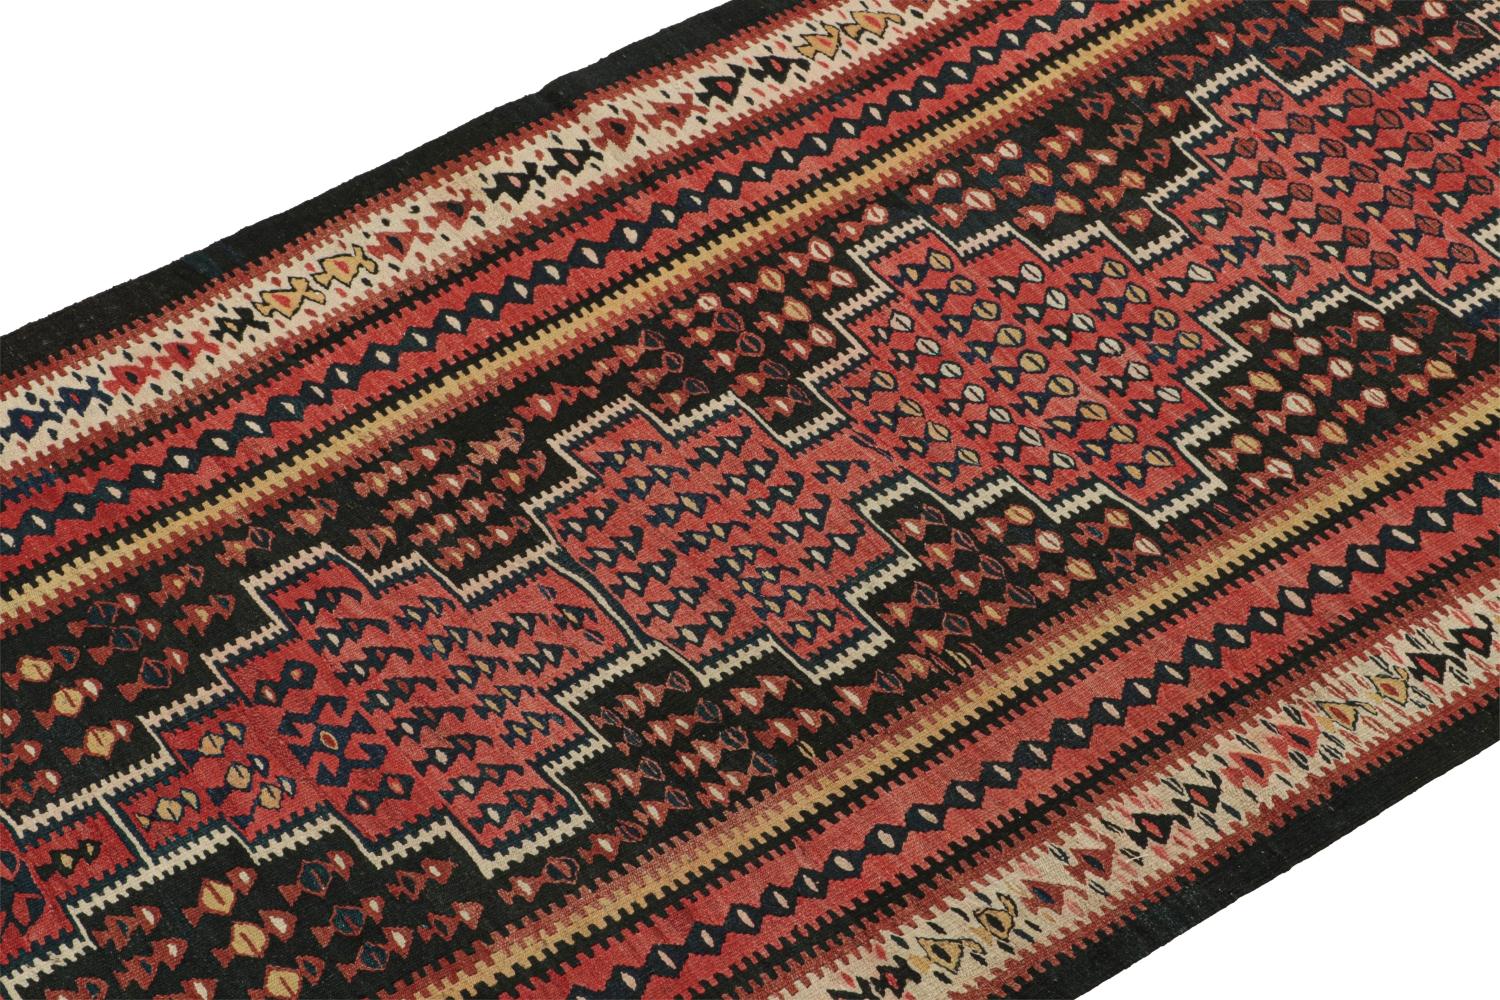 This vintage 4x11 Persian Kilim is a midcentury tribal rug that we believe originates from Harsin in the Kermanshah province. 

On the Design:

Handwoven in wool circa 1950-1960, its design enjoys finely detailed tribal geometric patterns in